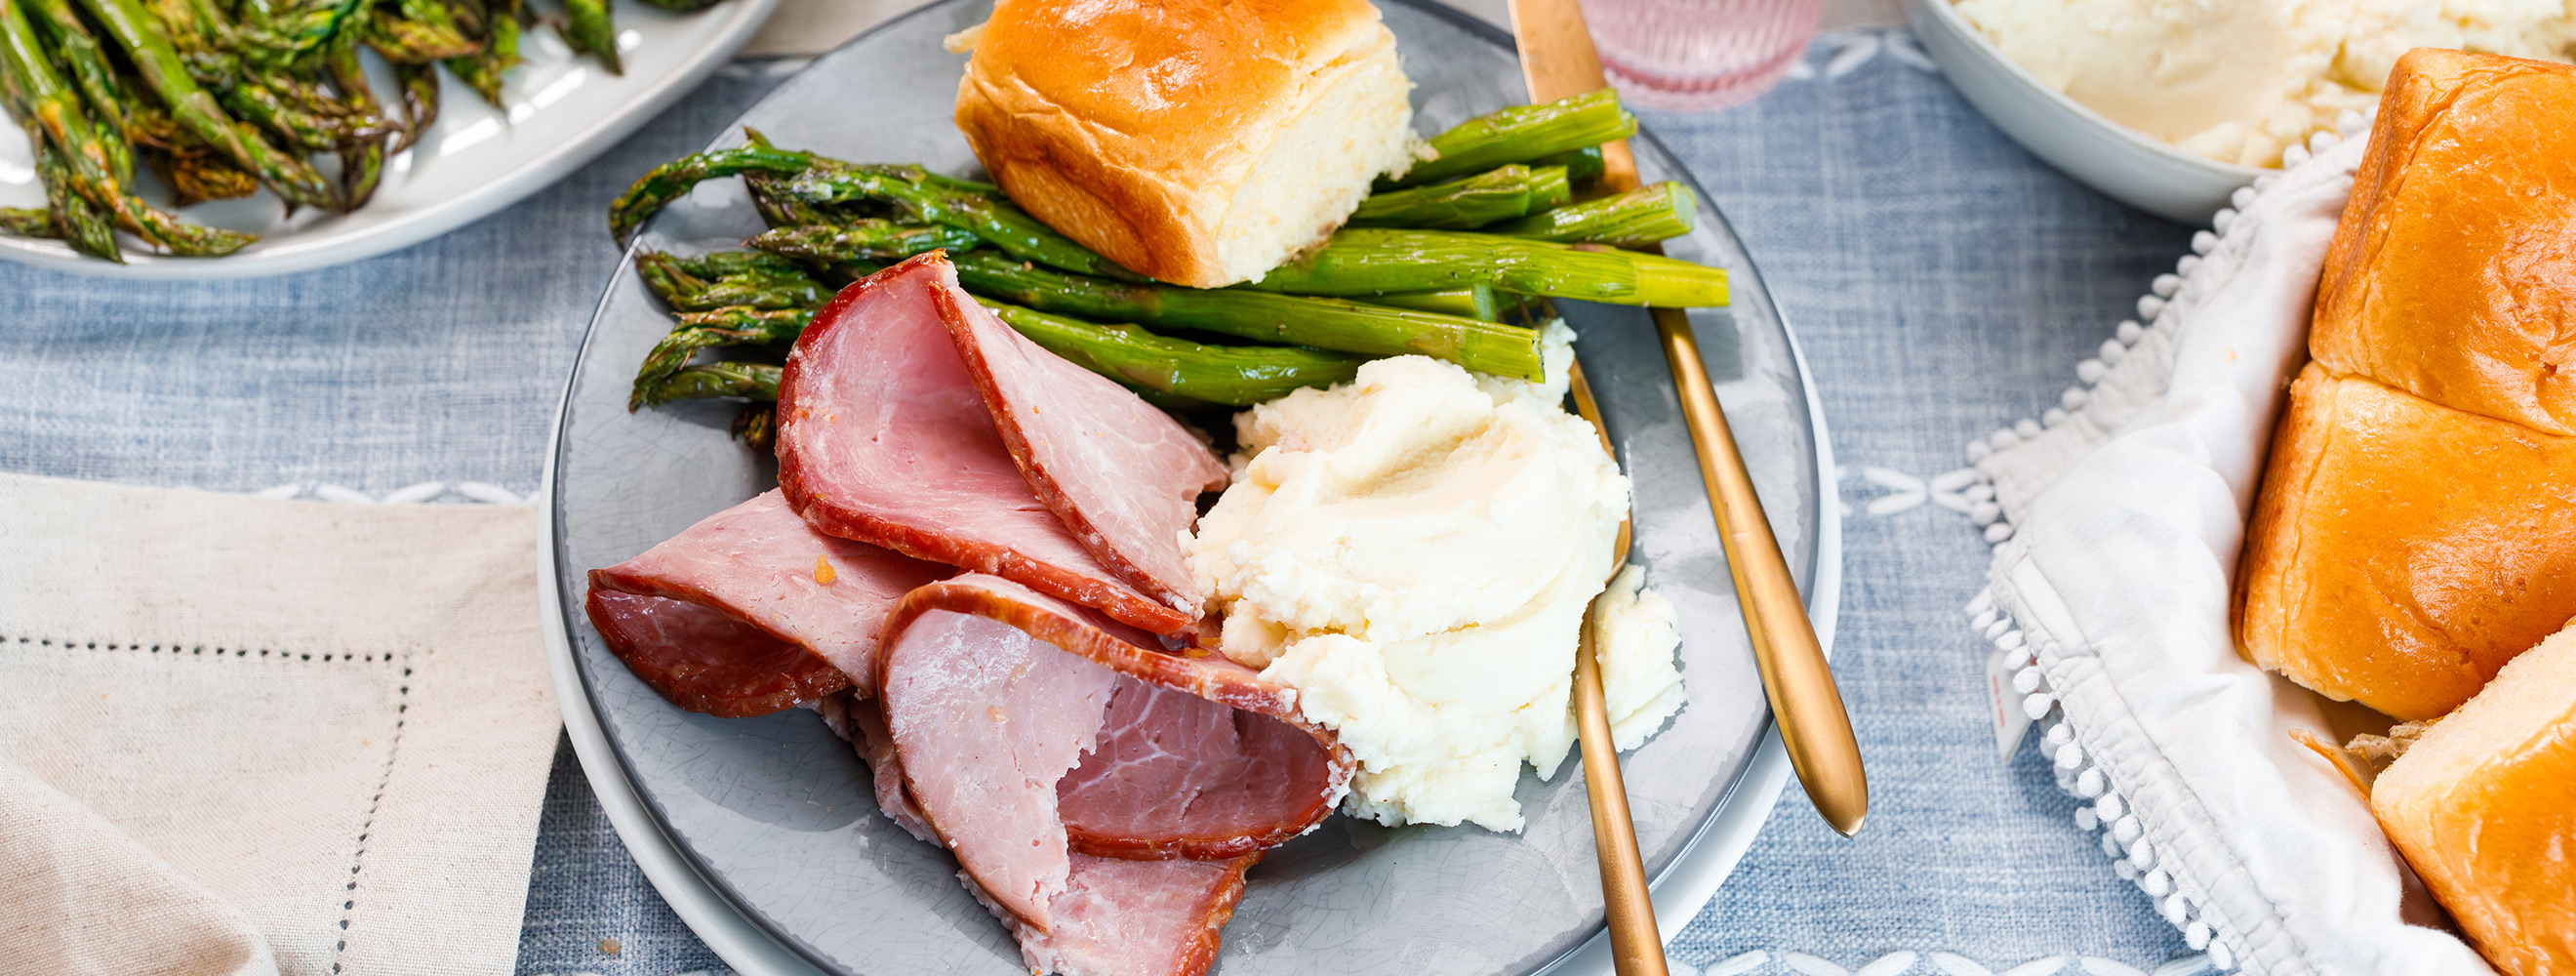 a plated Easter dinner with sliced ham, mashed potatoes, asparagus and rolls.